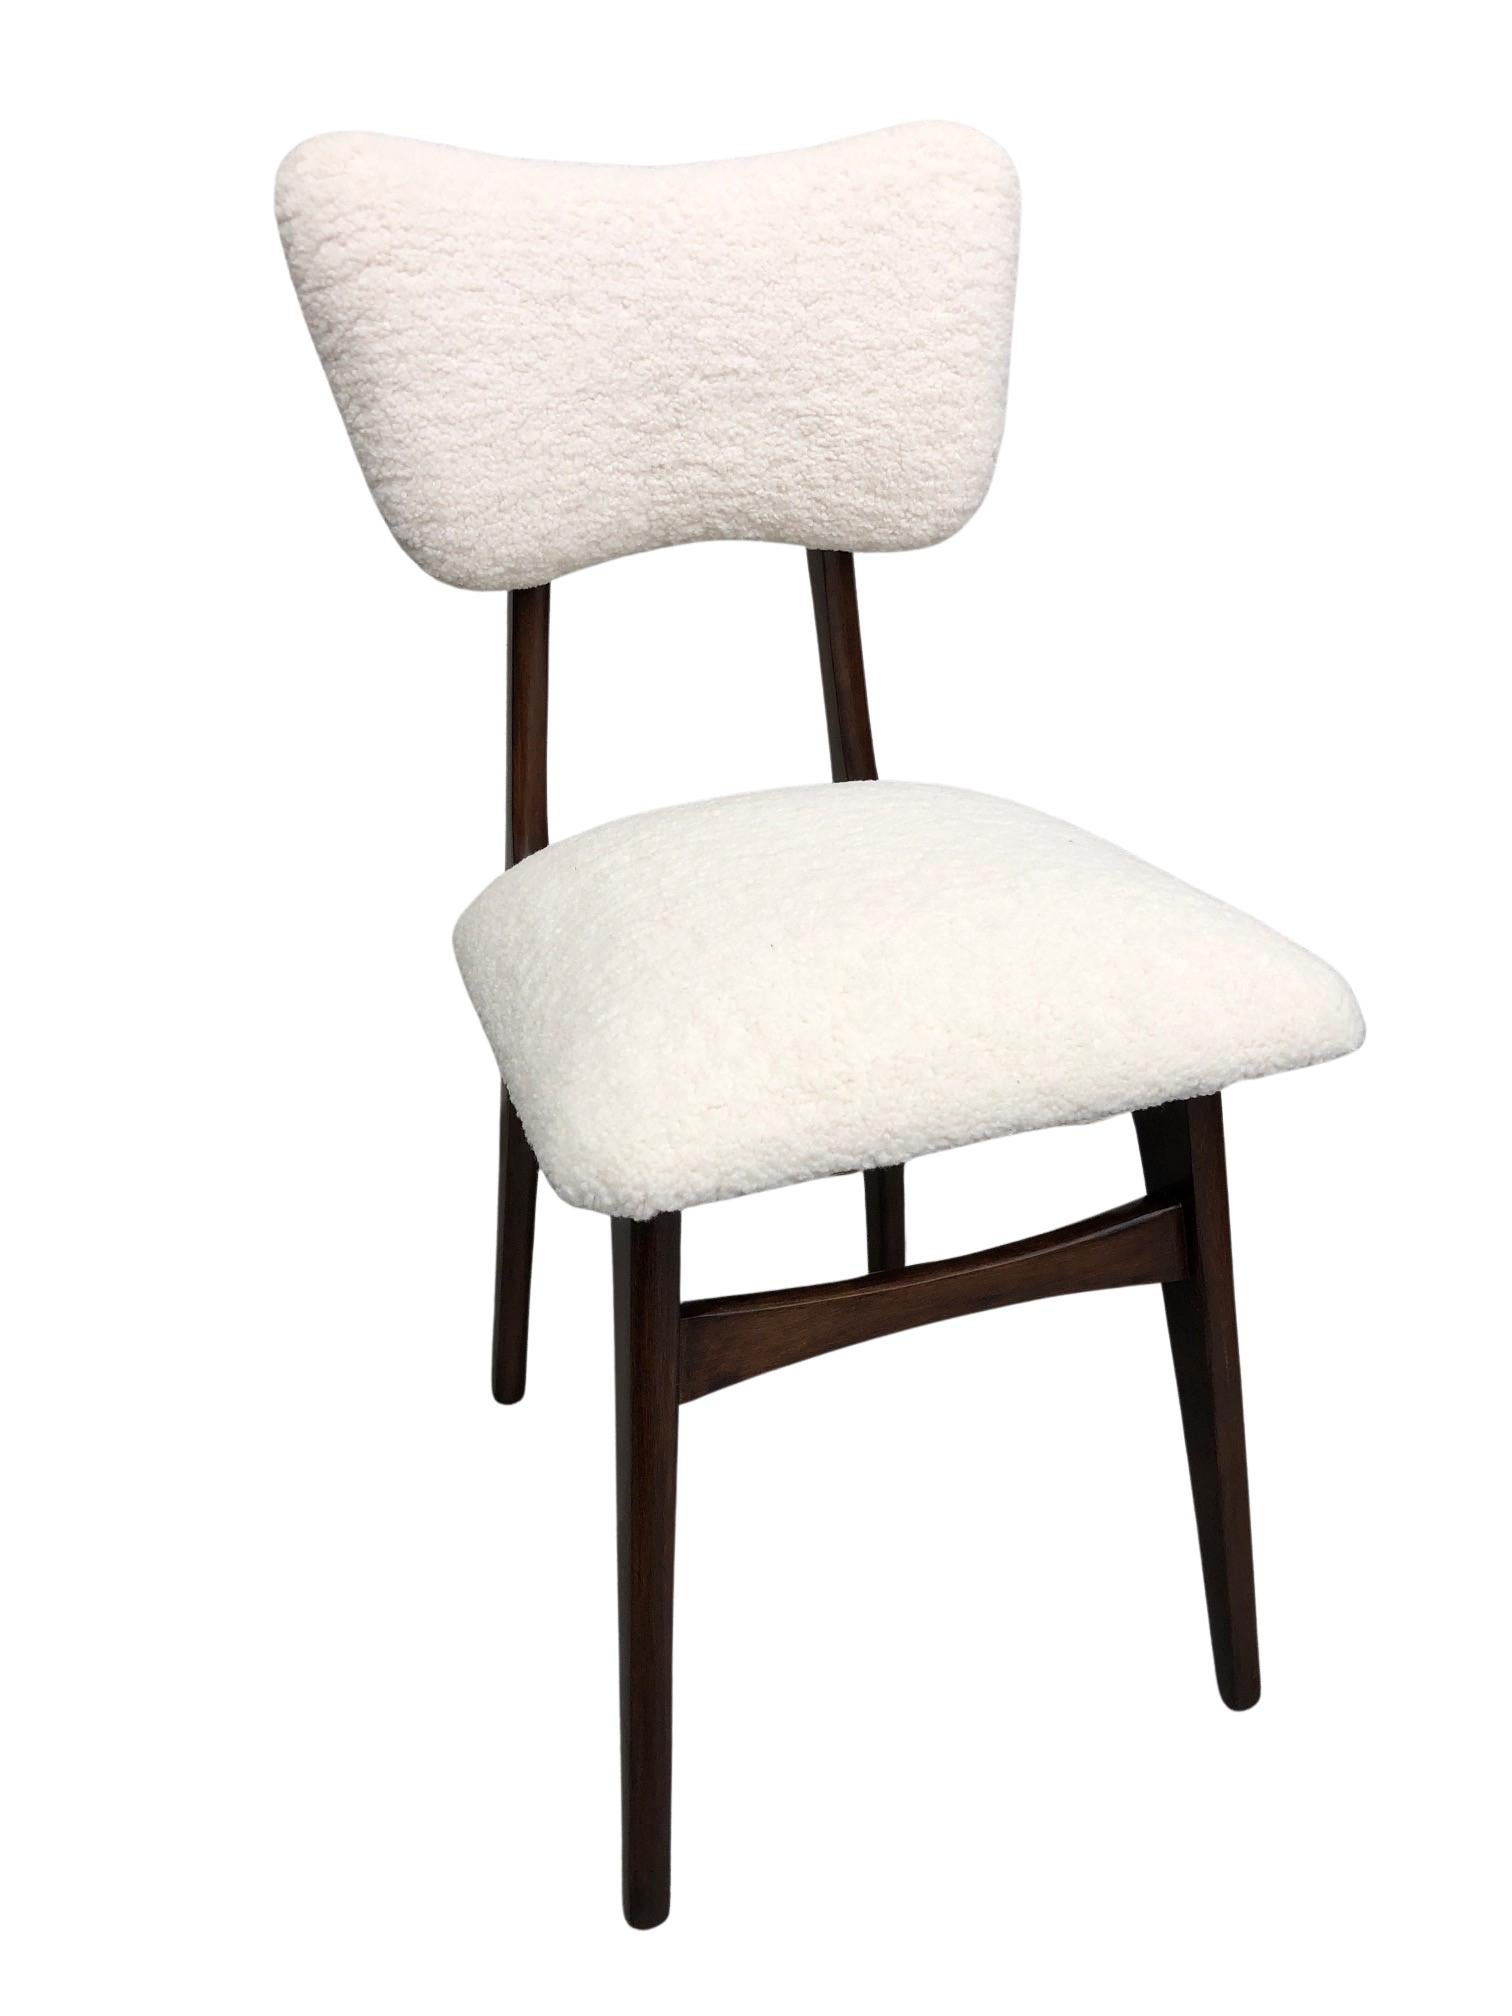 Set of 4 Midcentury Beige Bouclé Dining Chairs, Europe, 1960s For Sale 3